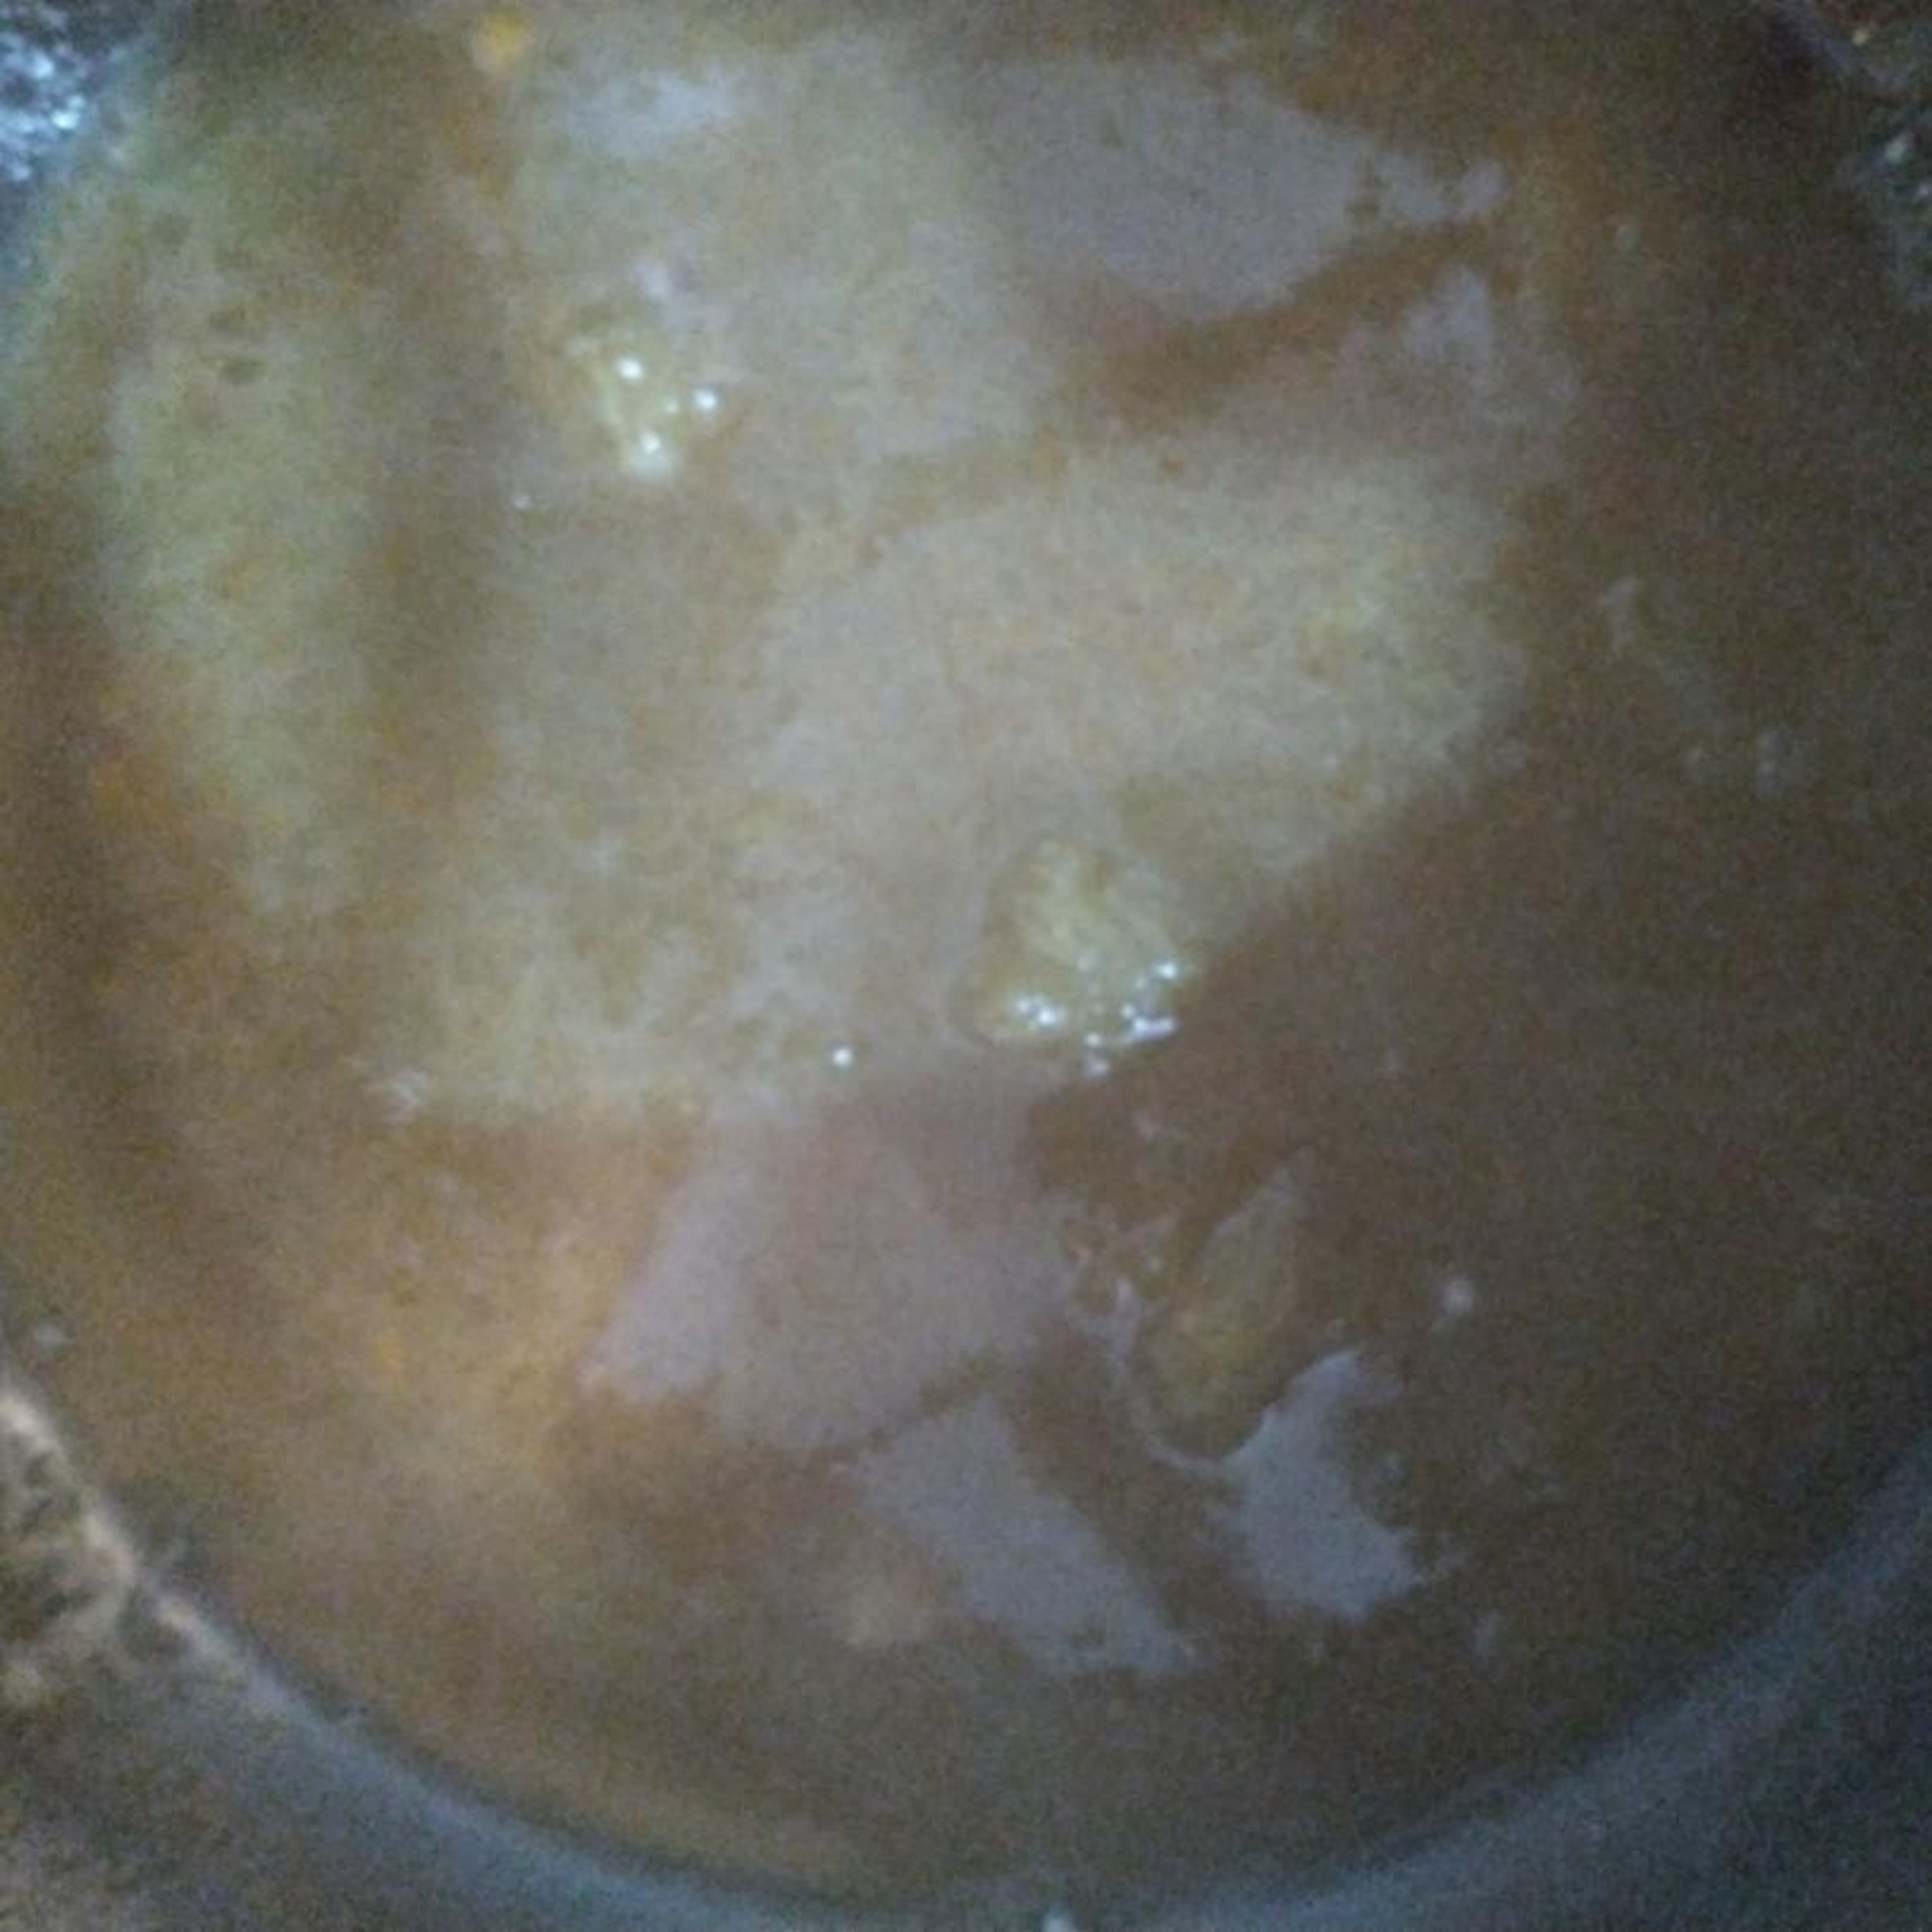 Bring the honey, sugar, water and yeast extract to a simmer in a saucepan. Add the orange juice and zest, and ground cardamom seeds and a cinnamon stick, if you like. Simmer until slightly reduced, about 3-4 minutes.